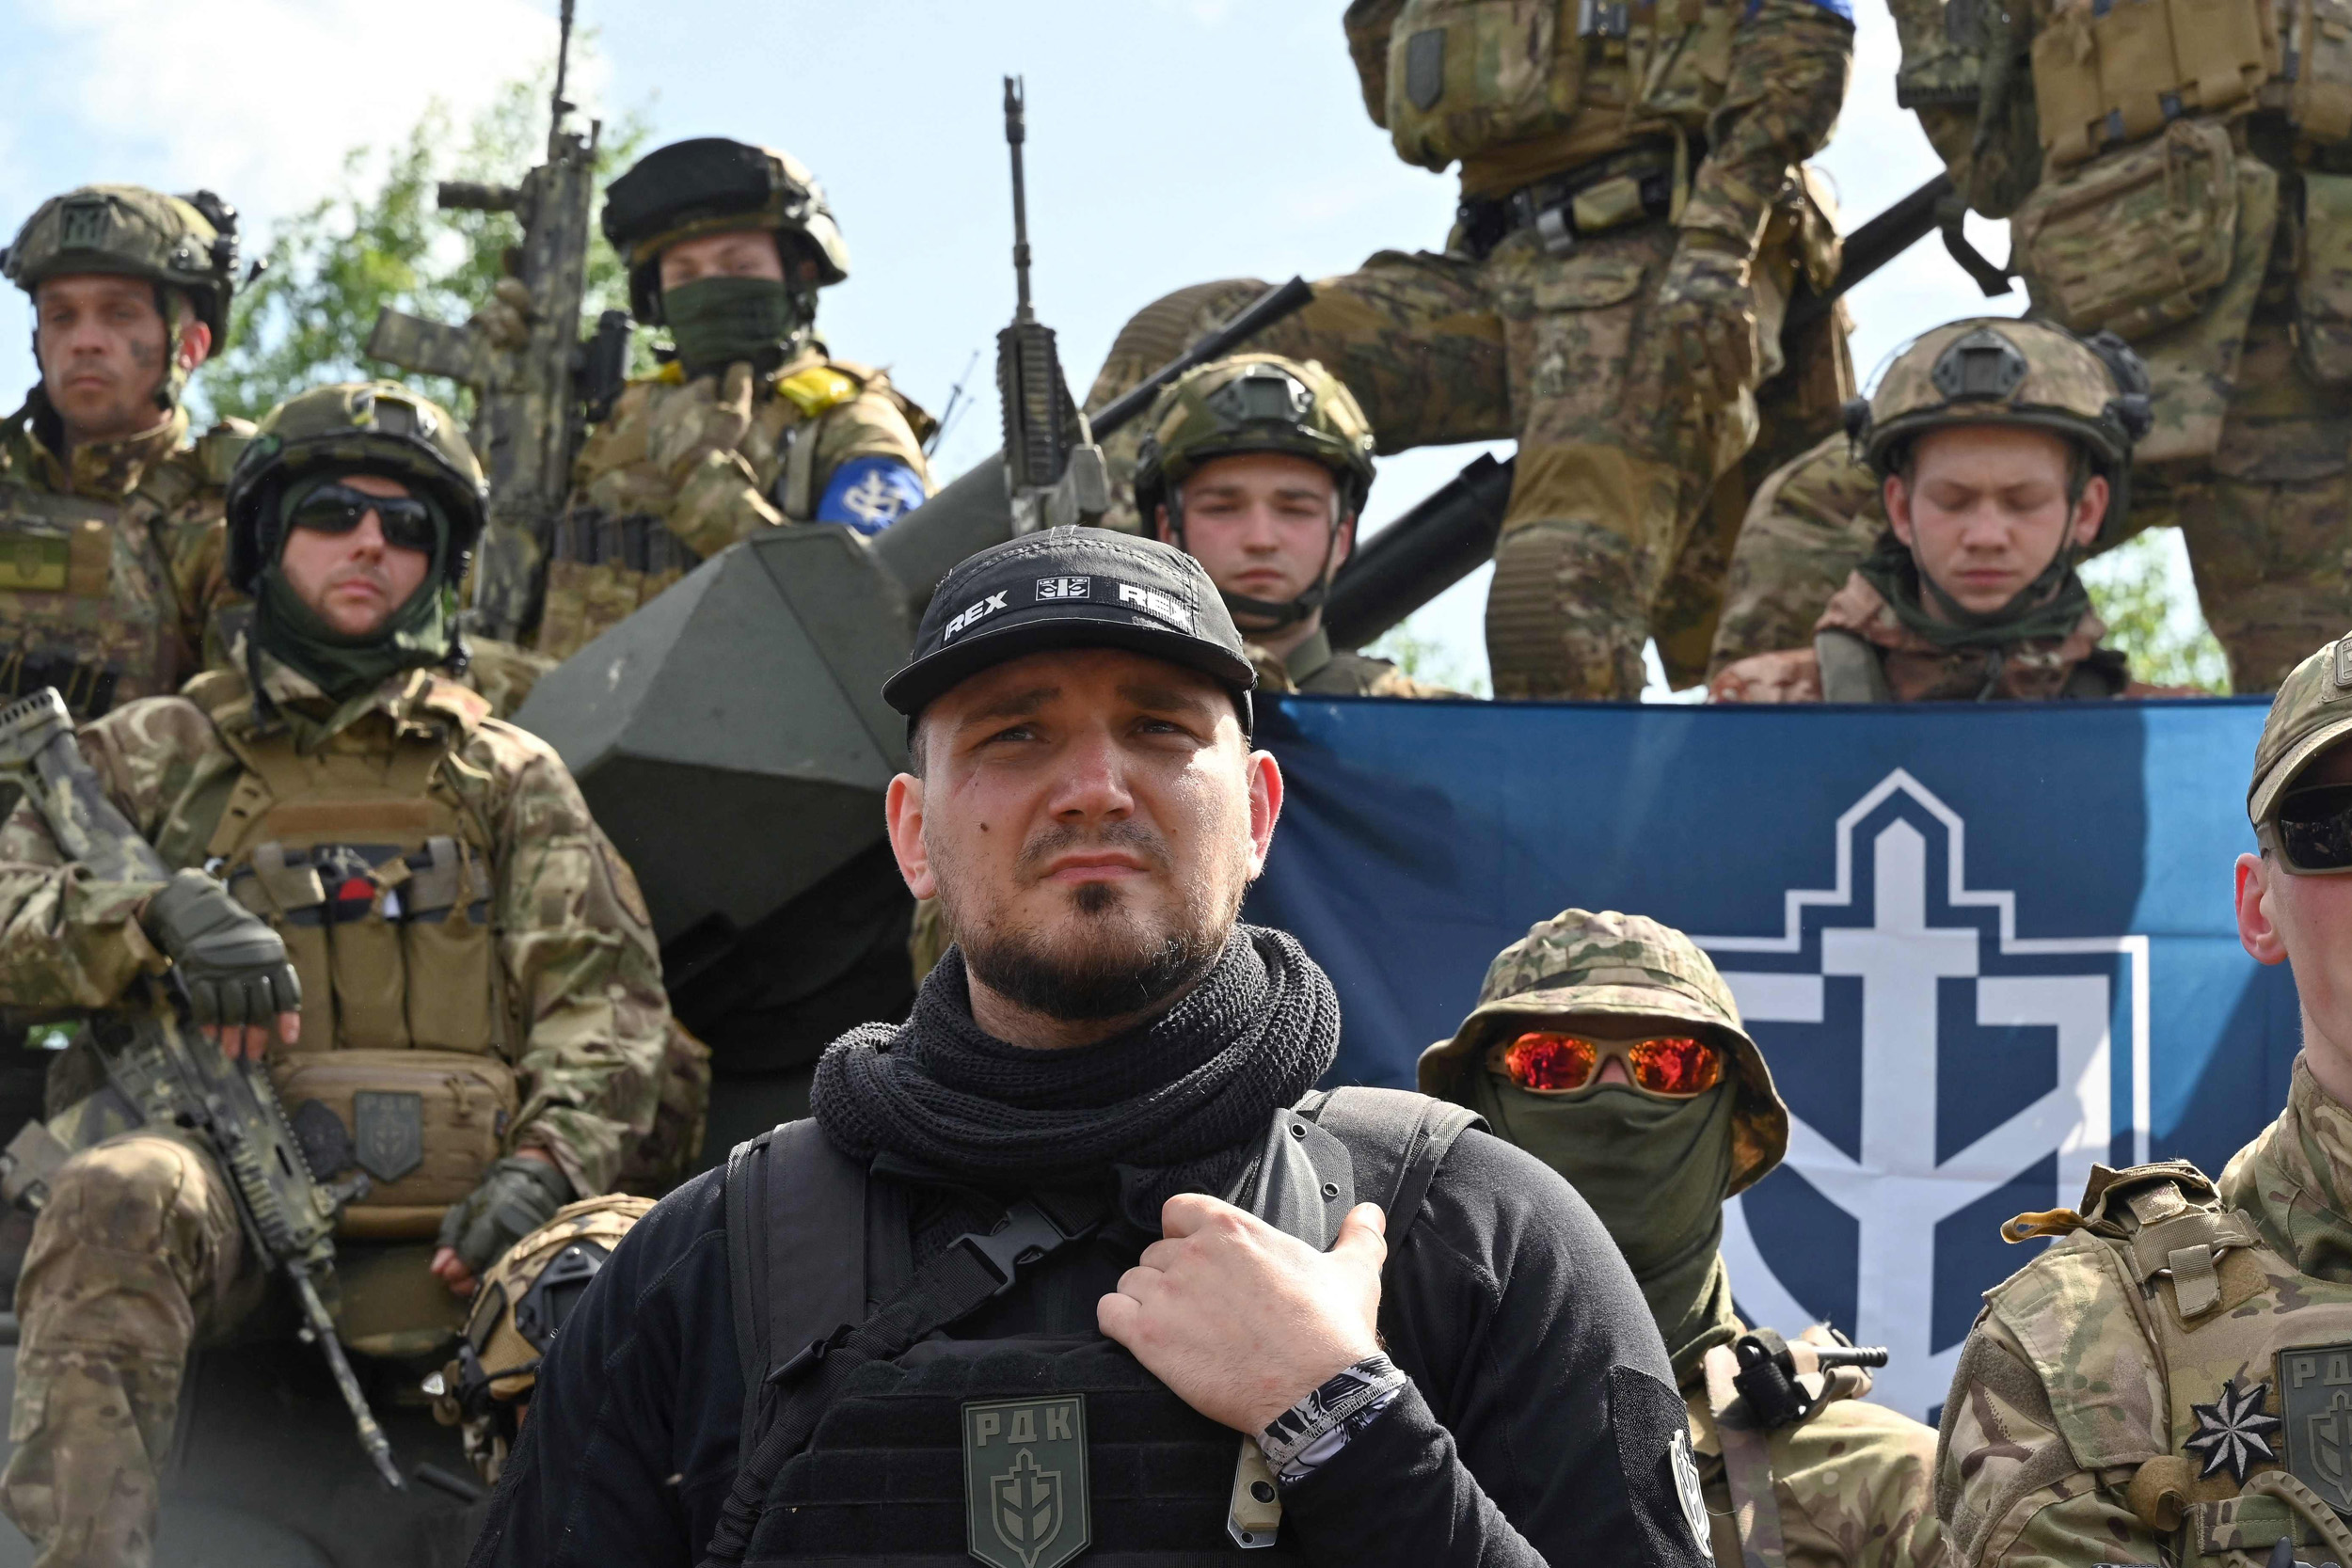 The founder of the Russian Volunteer Corps, Denis Kapustin, flanked by fighters in northern Ukraine, not far from the Russian border